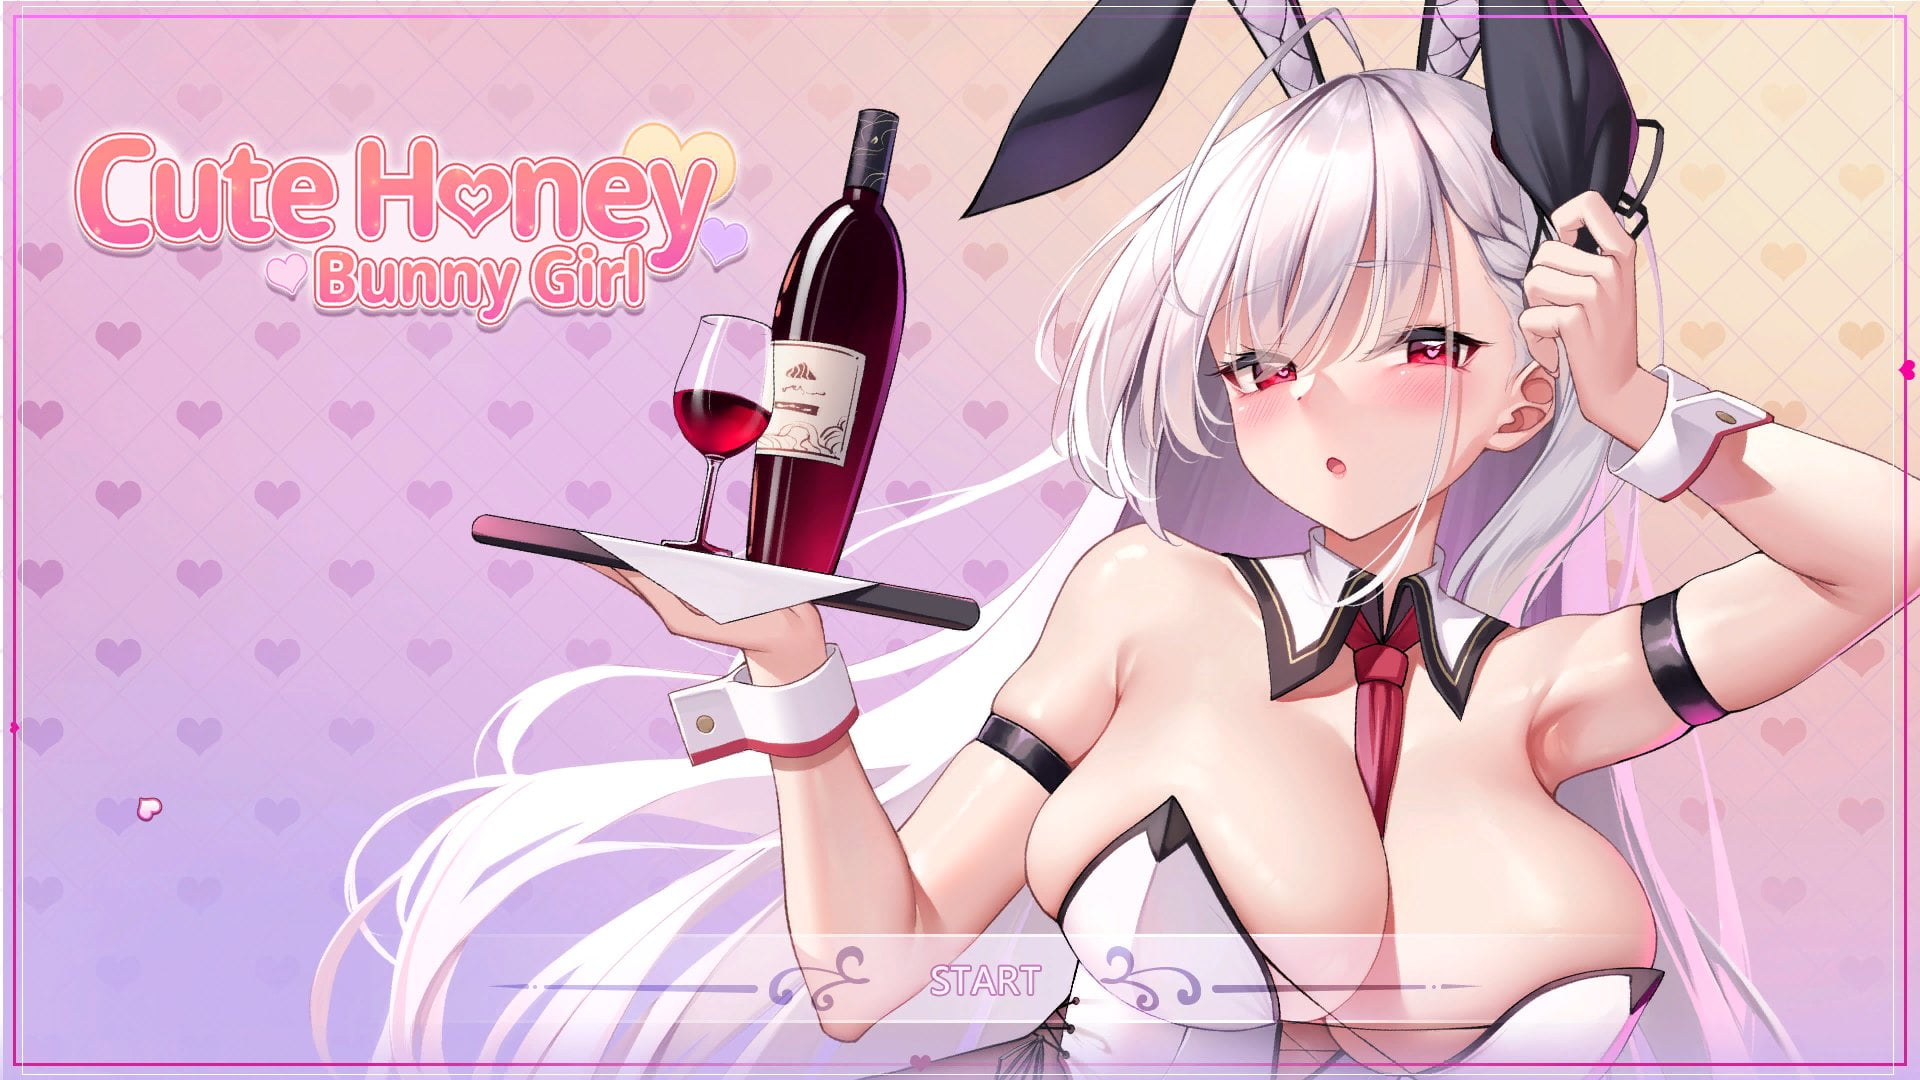 Cute Honey: Bunny Girl porn xxx game download cover